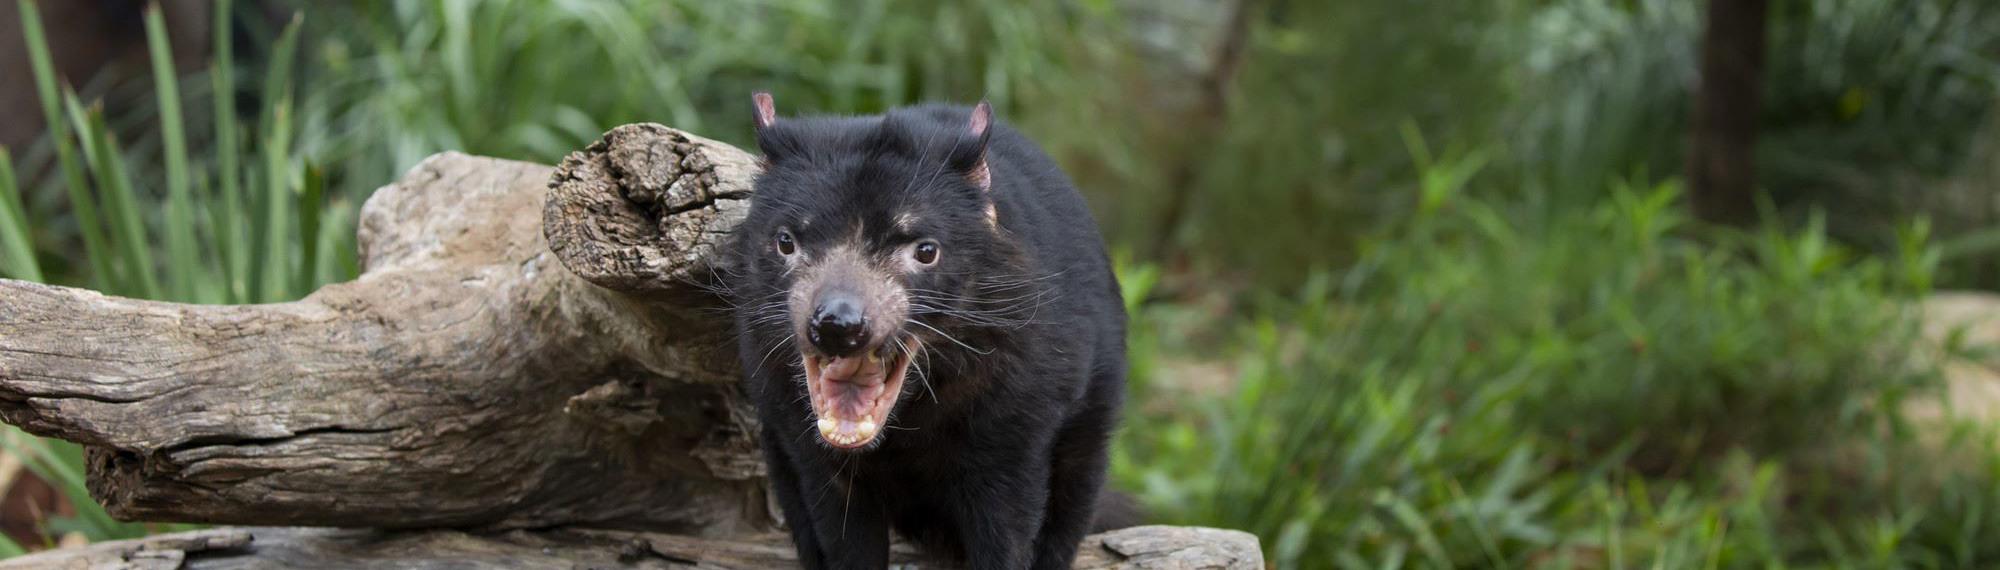 A Tasmanian Devil standing on a log with its mouth open showing its sharp teeth, with green bushy terrain in the background.